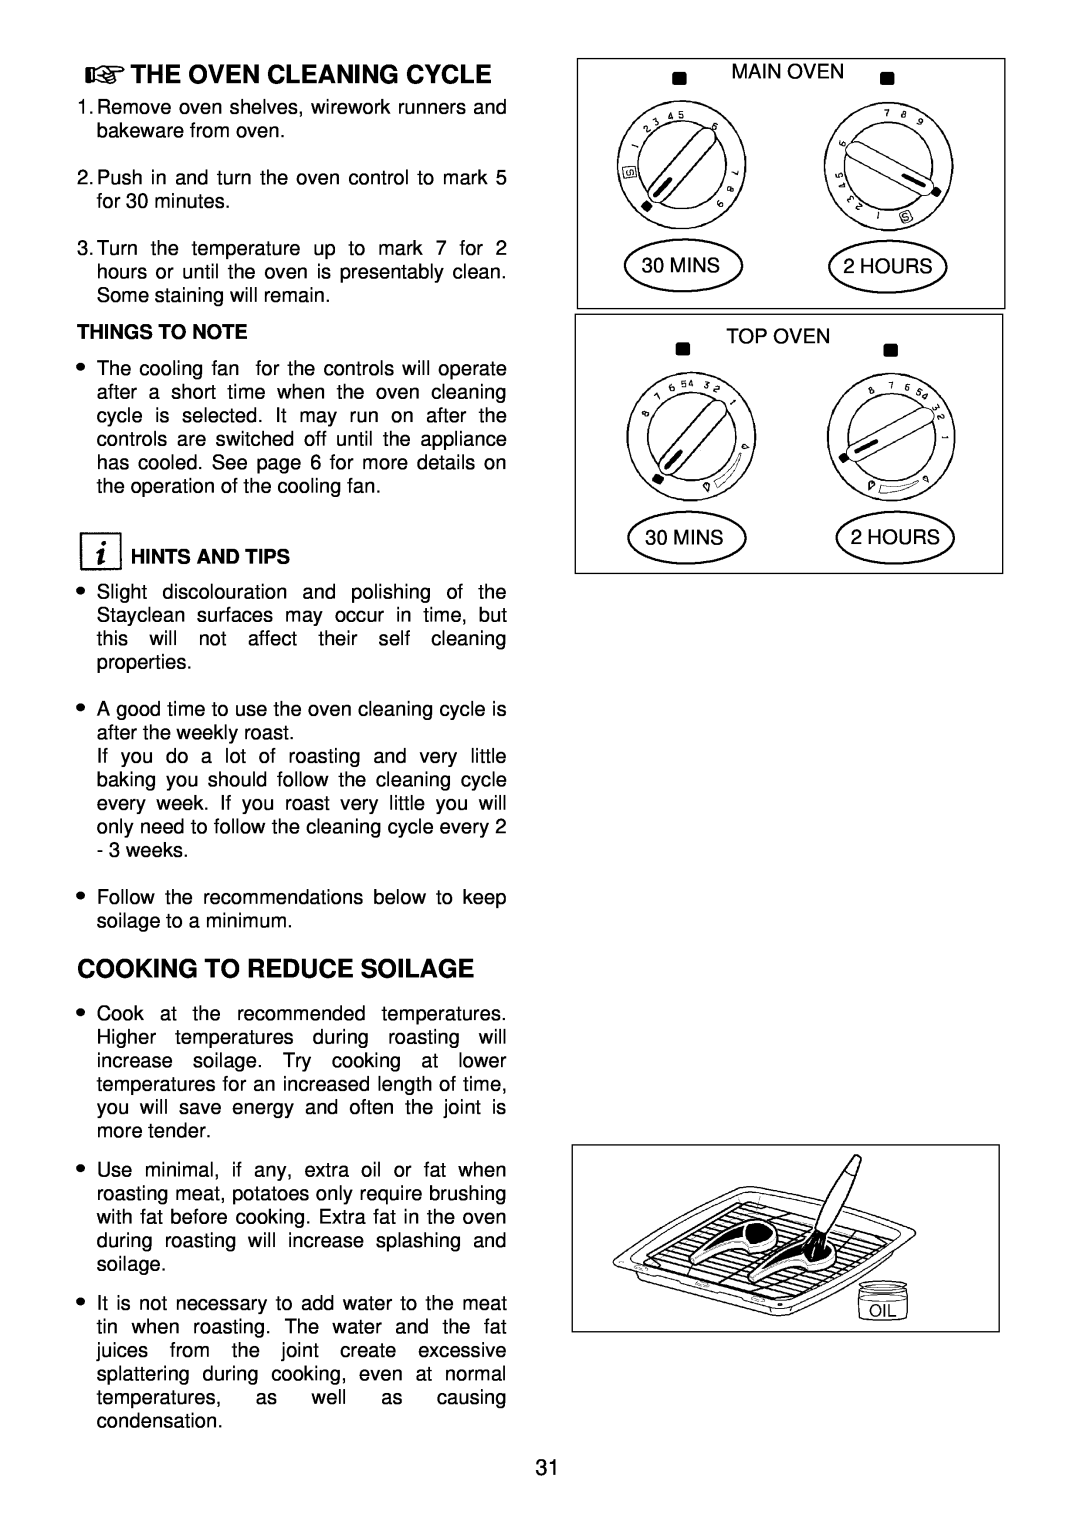 Electrolux EDB 876 manual The Oven Cleaning Cycle, Cooking To Reduce Soilage, Things To Note, Hints And Tips 